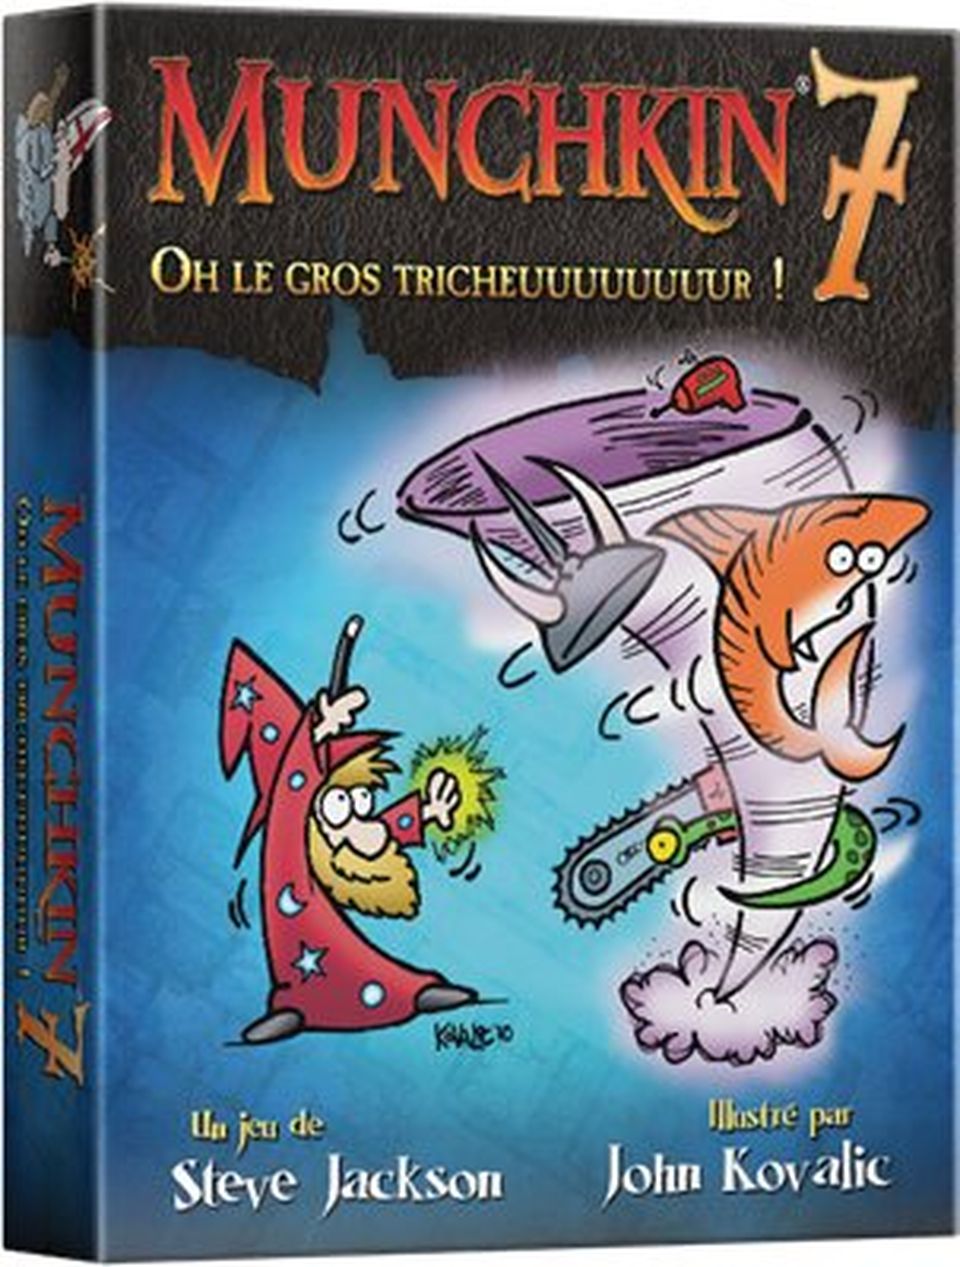 Munchkin 7 : Oh Le Gros Tricheuuuuuur ! (Extension) image